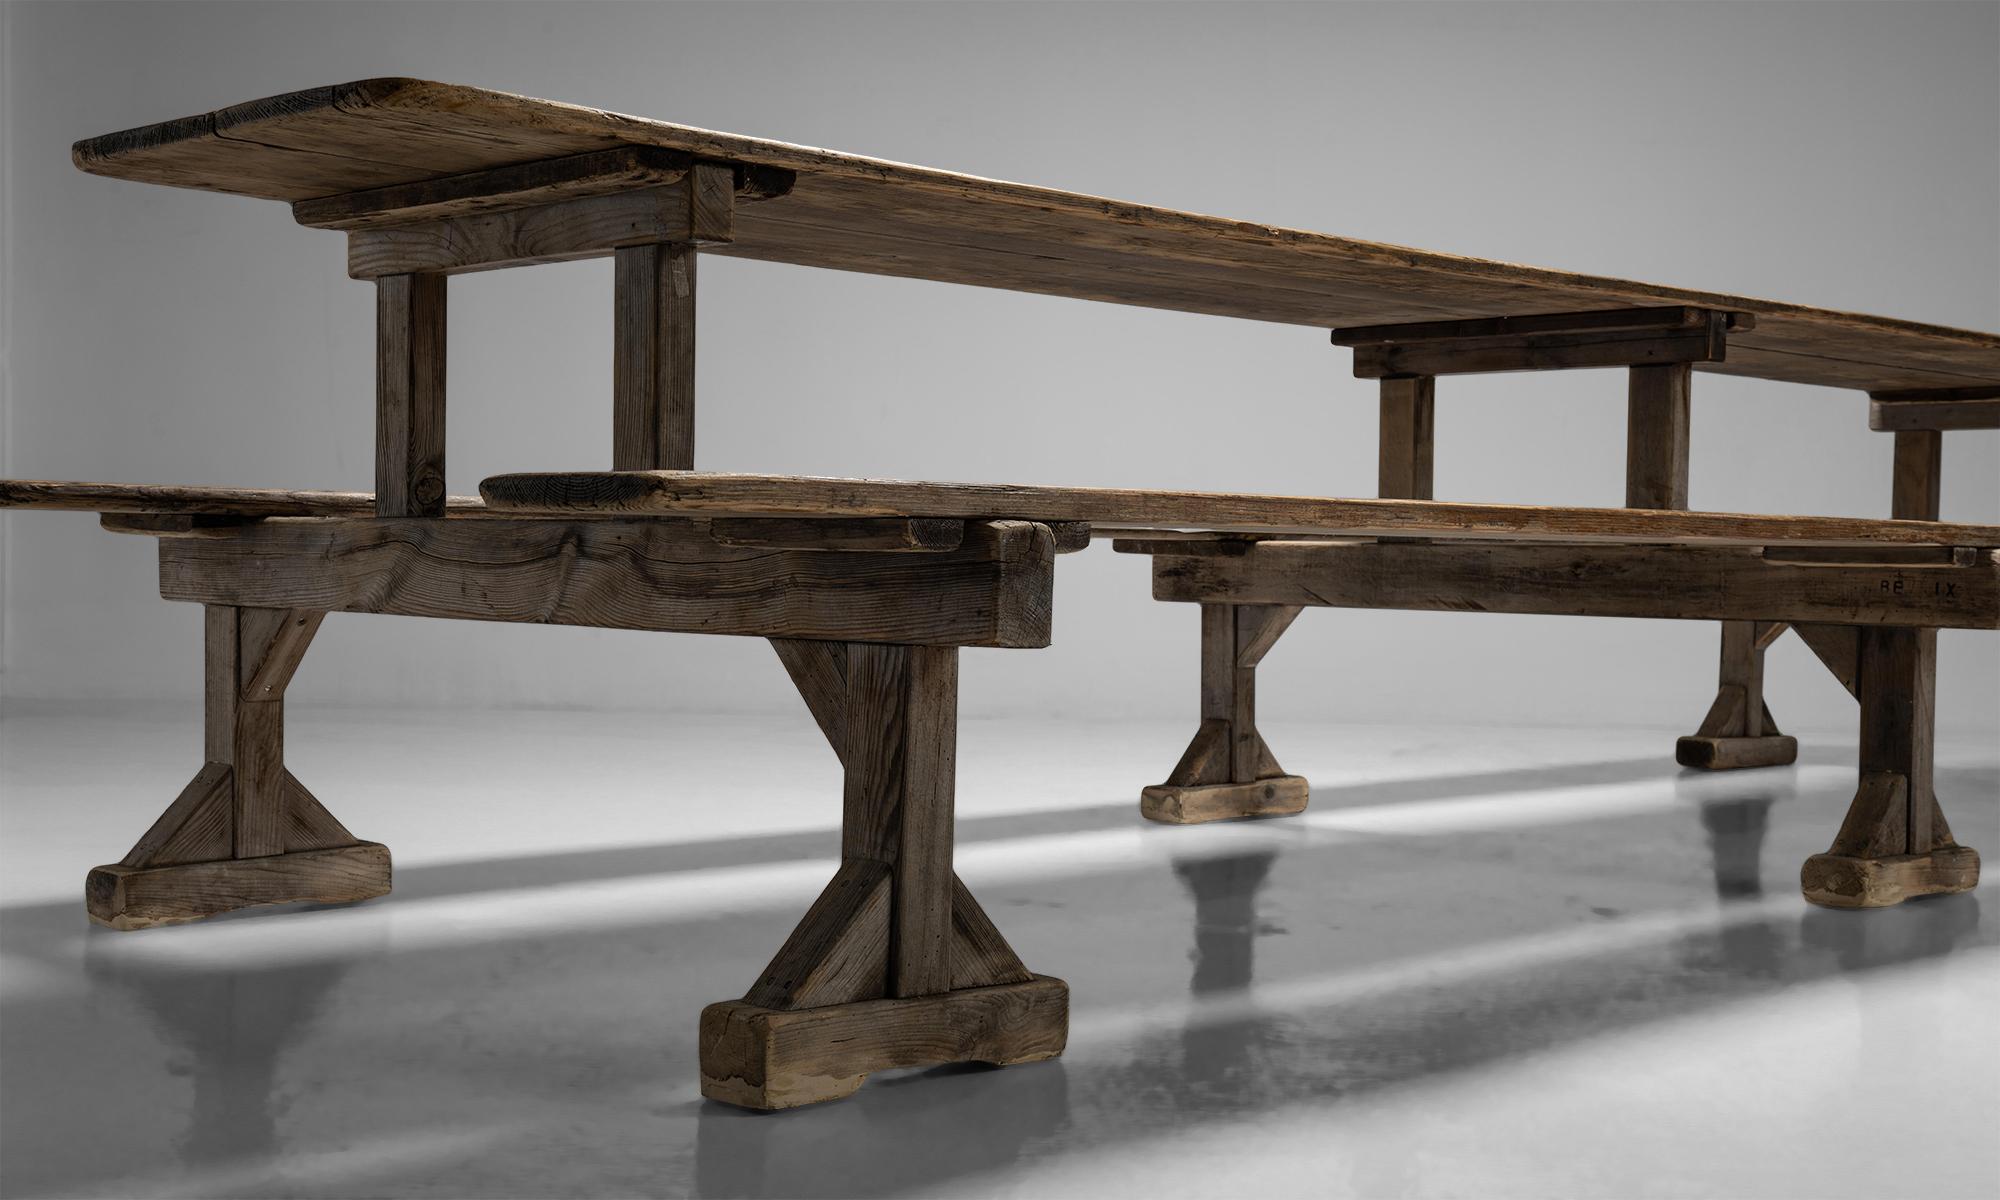 Huge trestle table with benches

France Circa 1900

Three Stand alone pine trestles with plank pine table top and benches.

Measures: 157.5”W x 53”D x 31”H.